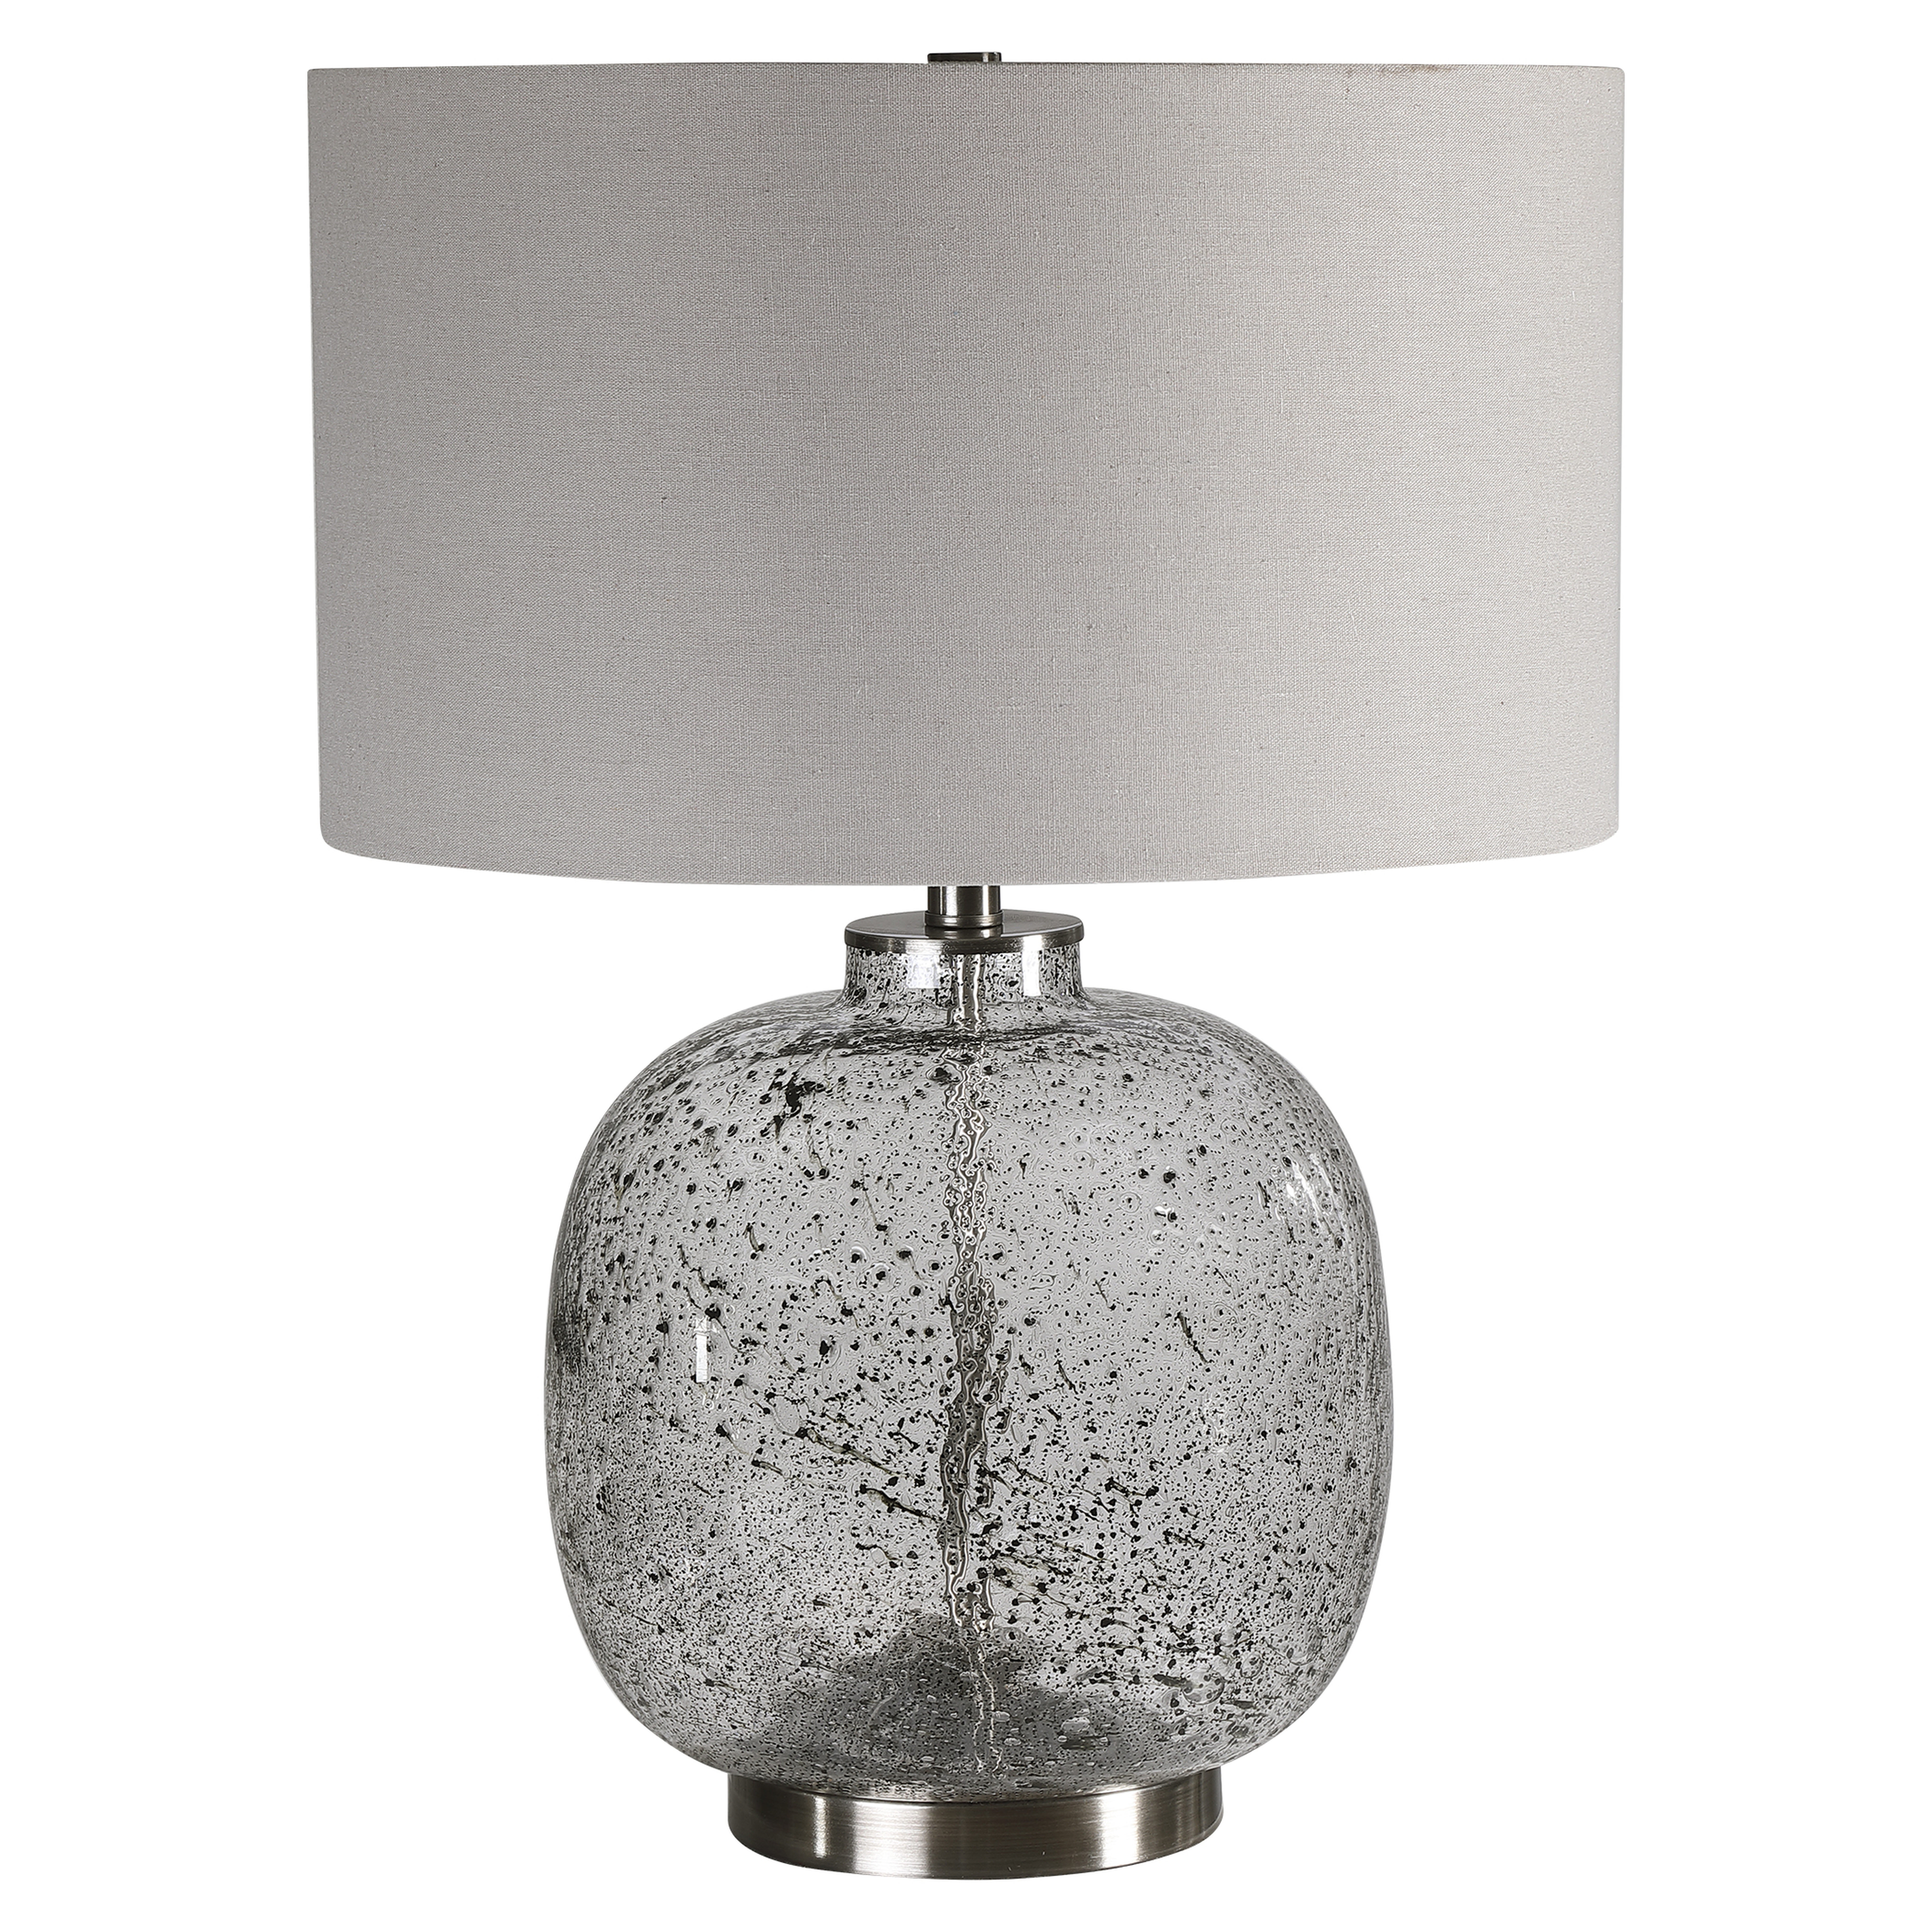 Storm Glass Table Lamp, 17" x 17" x 23.25" - Hudsonhill Foundry